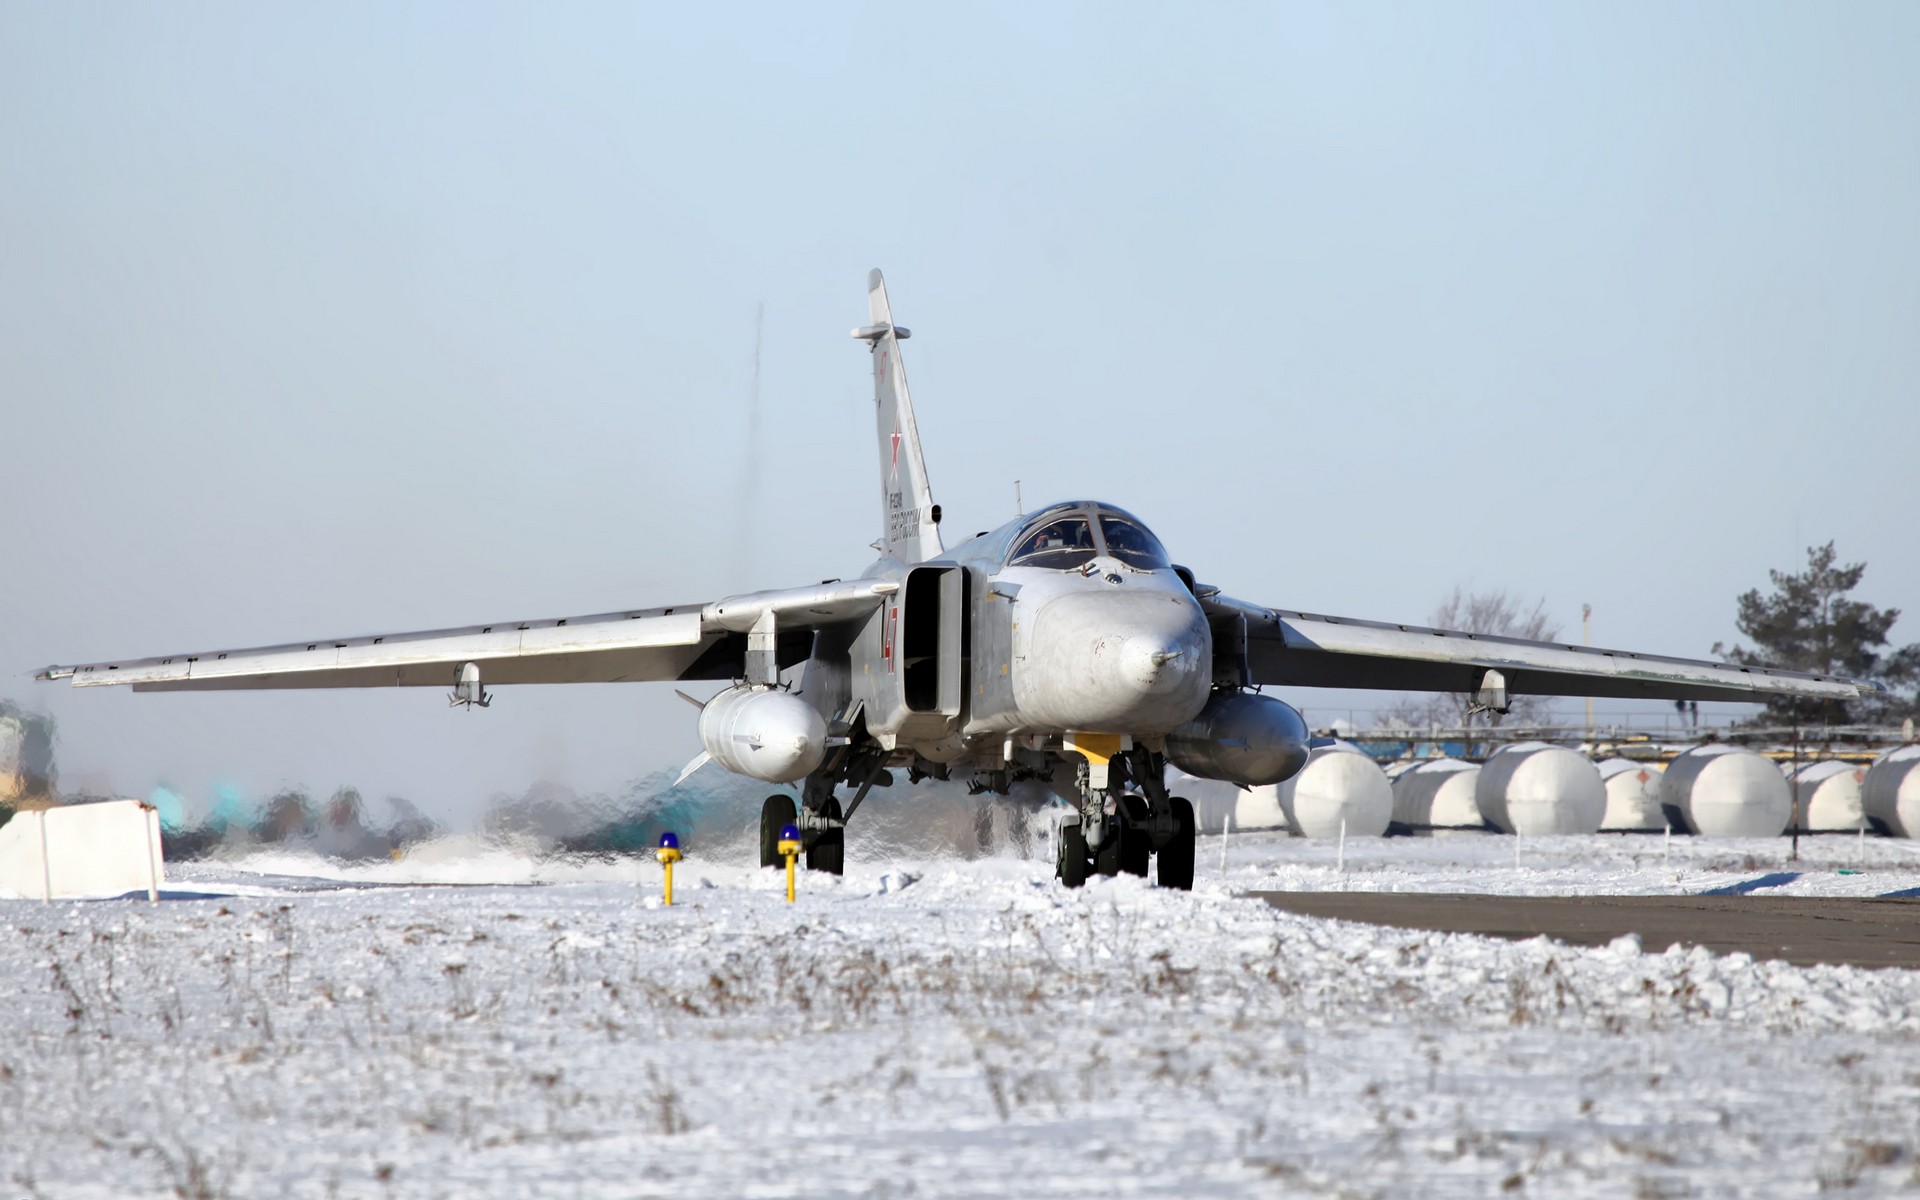 General 1920x1200 aircraft military airplane Sukhoi Su-24 Russian/Soviet aircraft Sukhoi frontal view snow covered snow